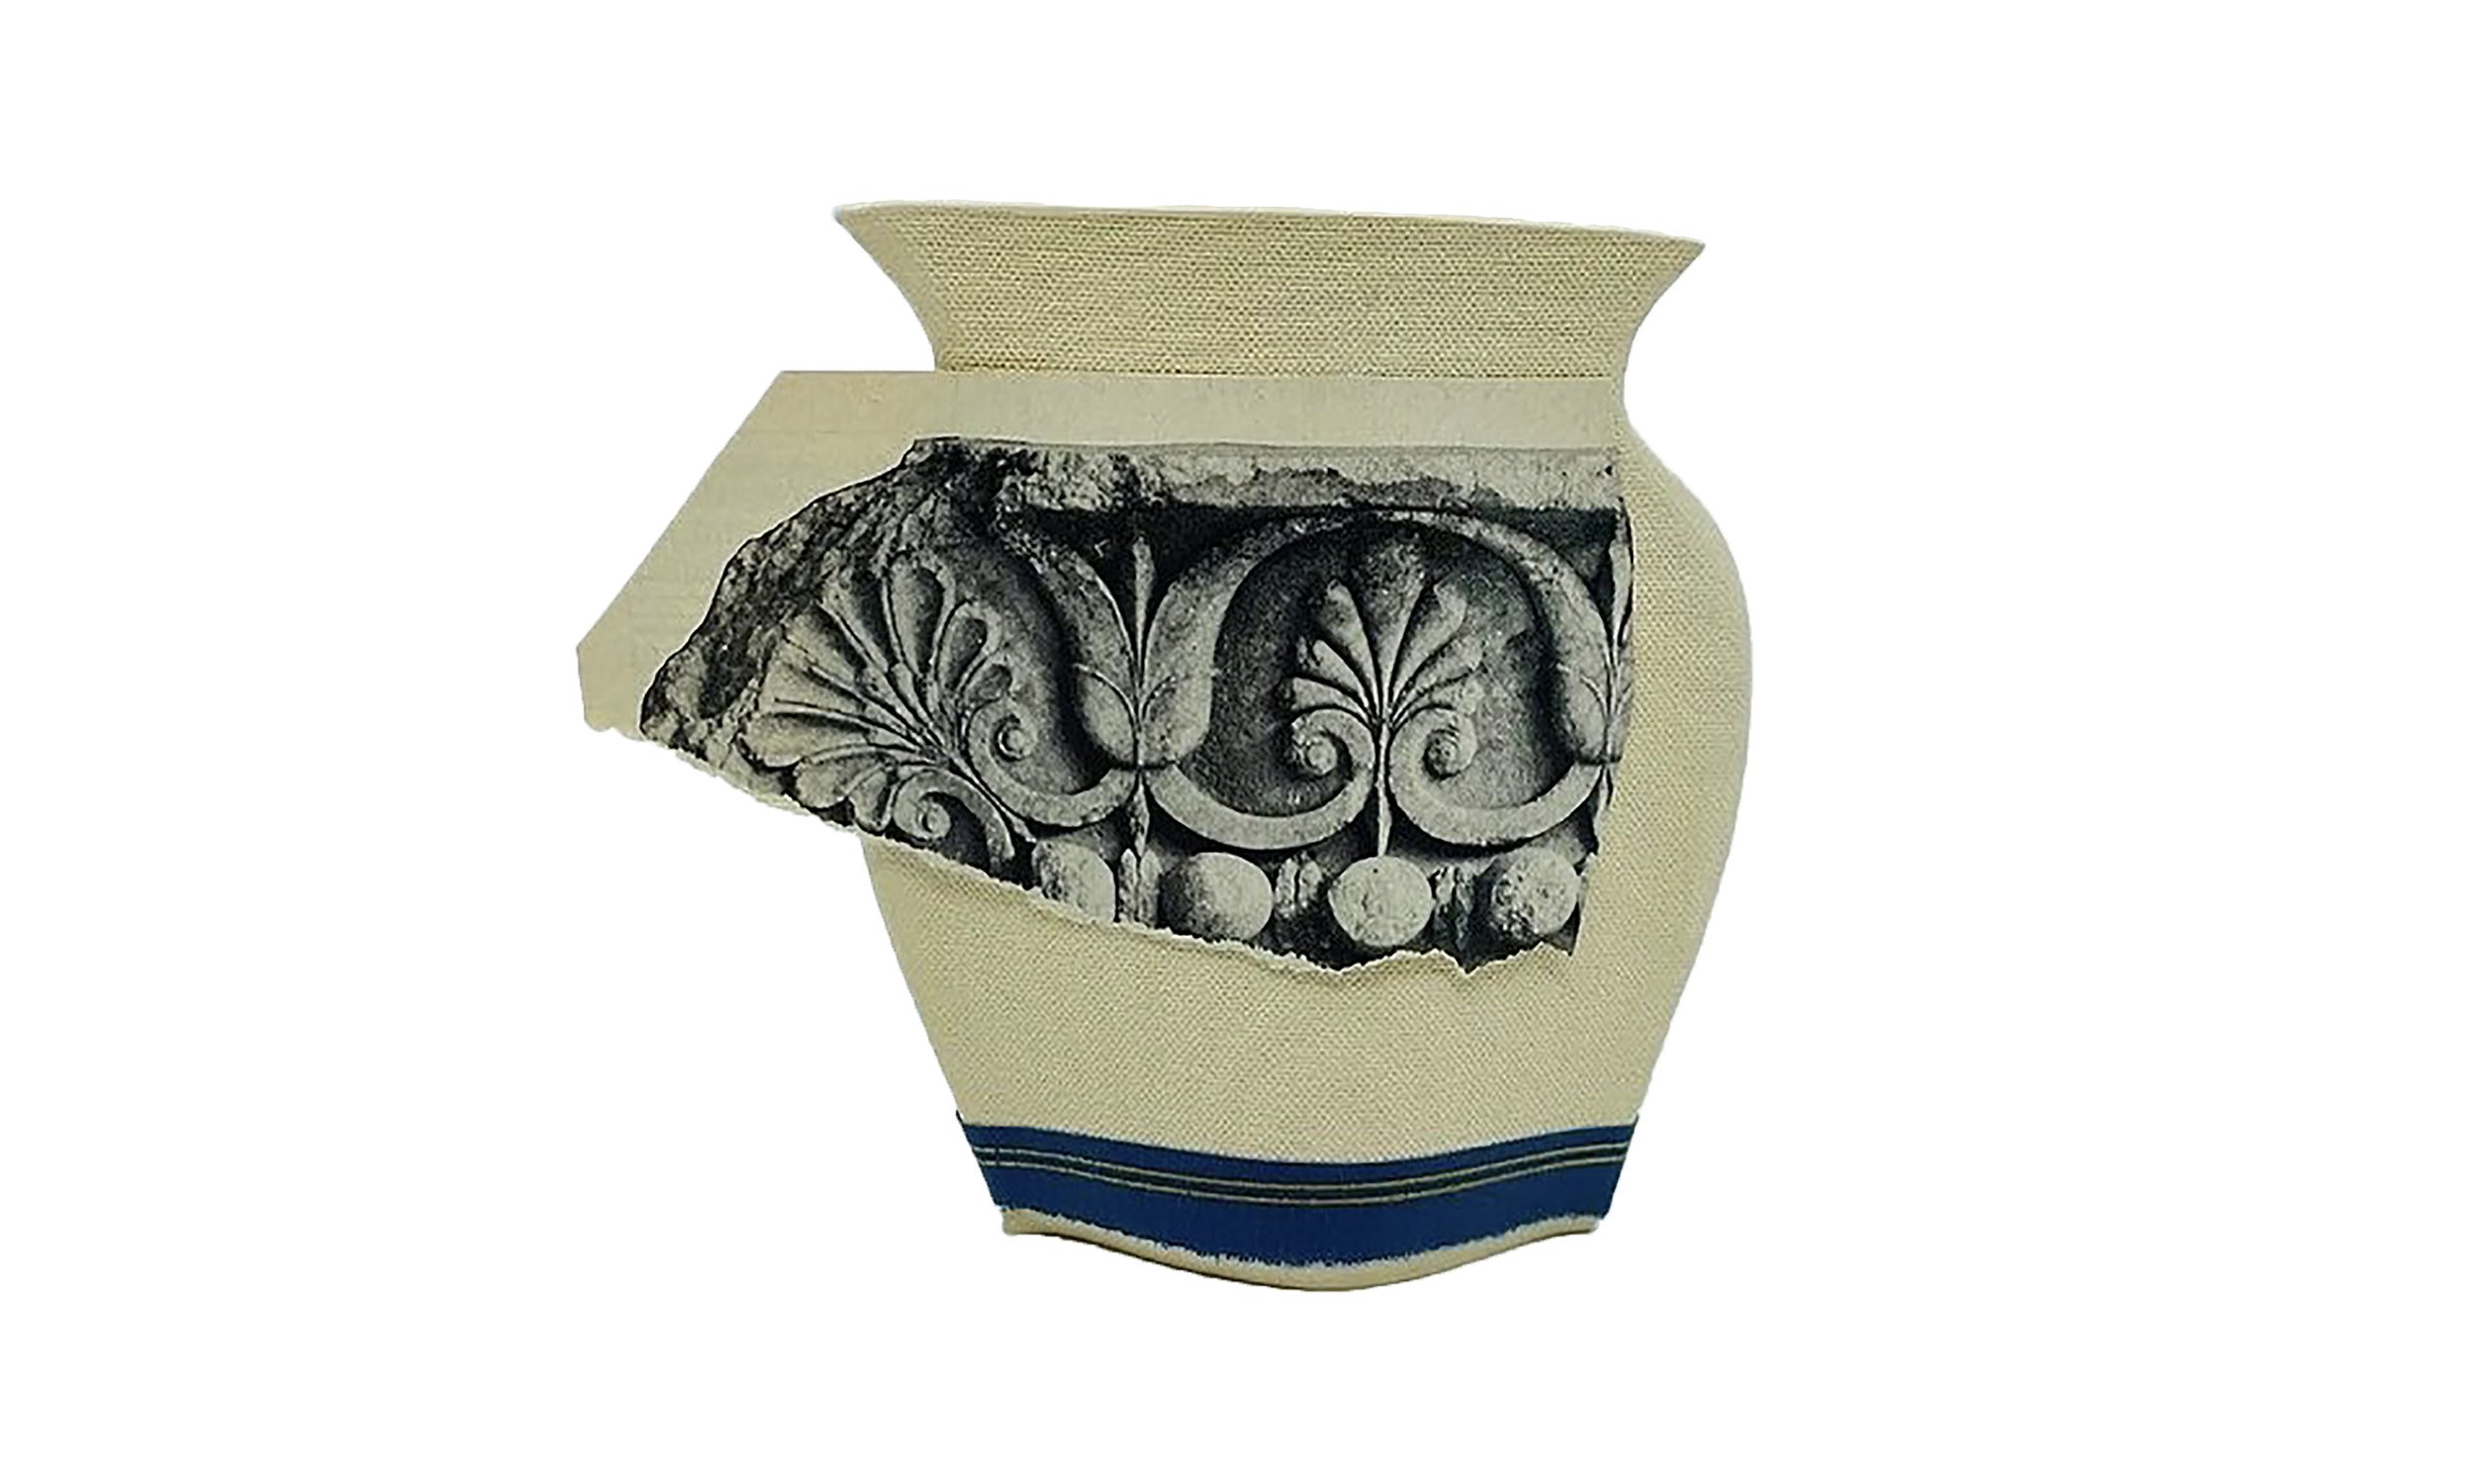 Ornate Vase, 2022, paper, book cover fabric on fired stoneware, $300 (Copy)